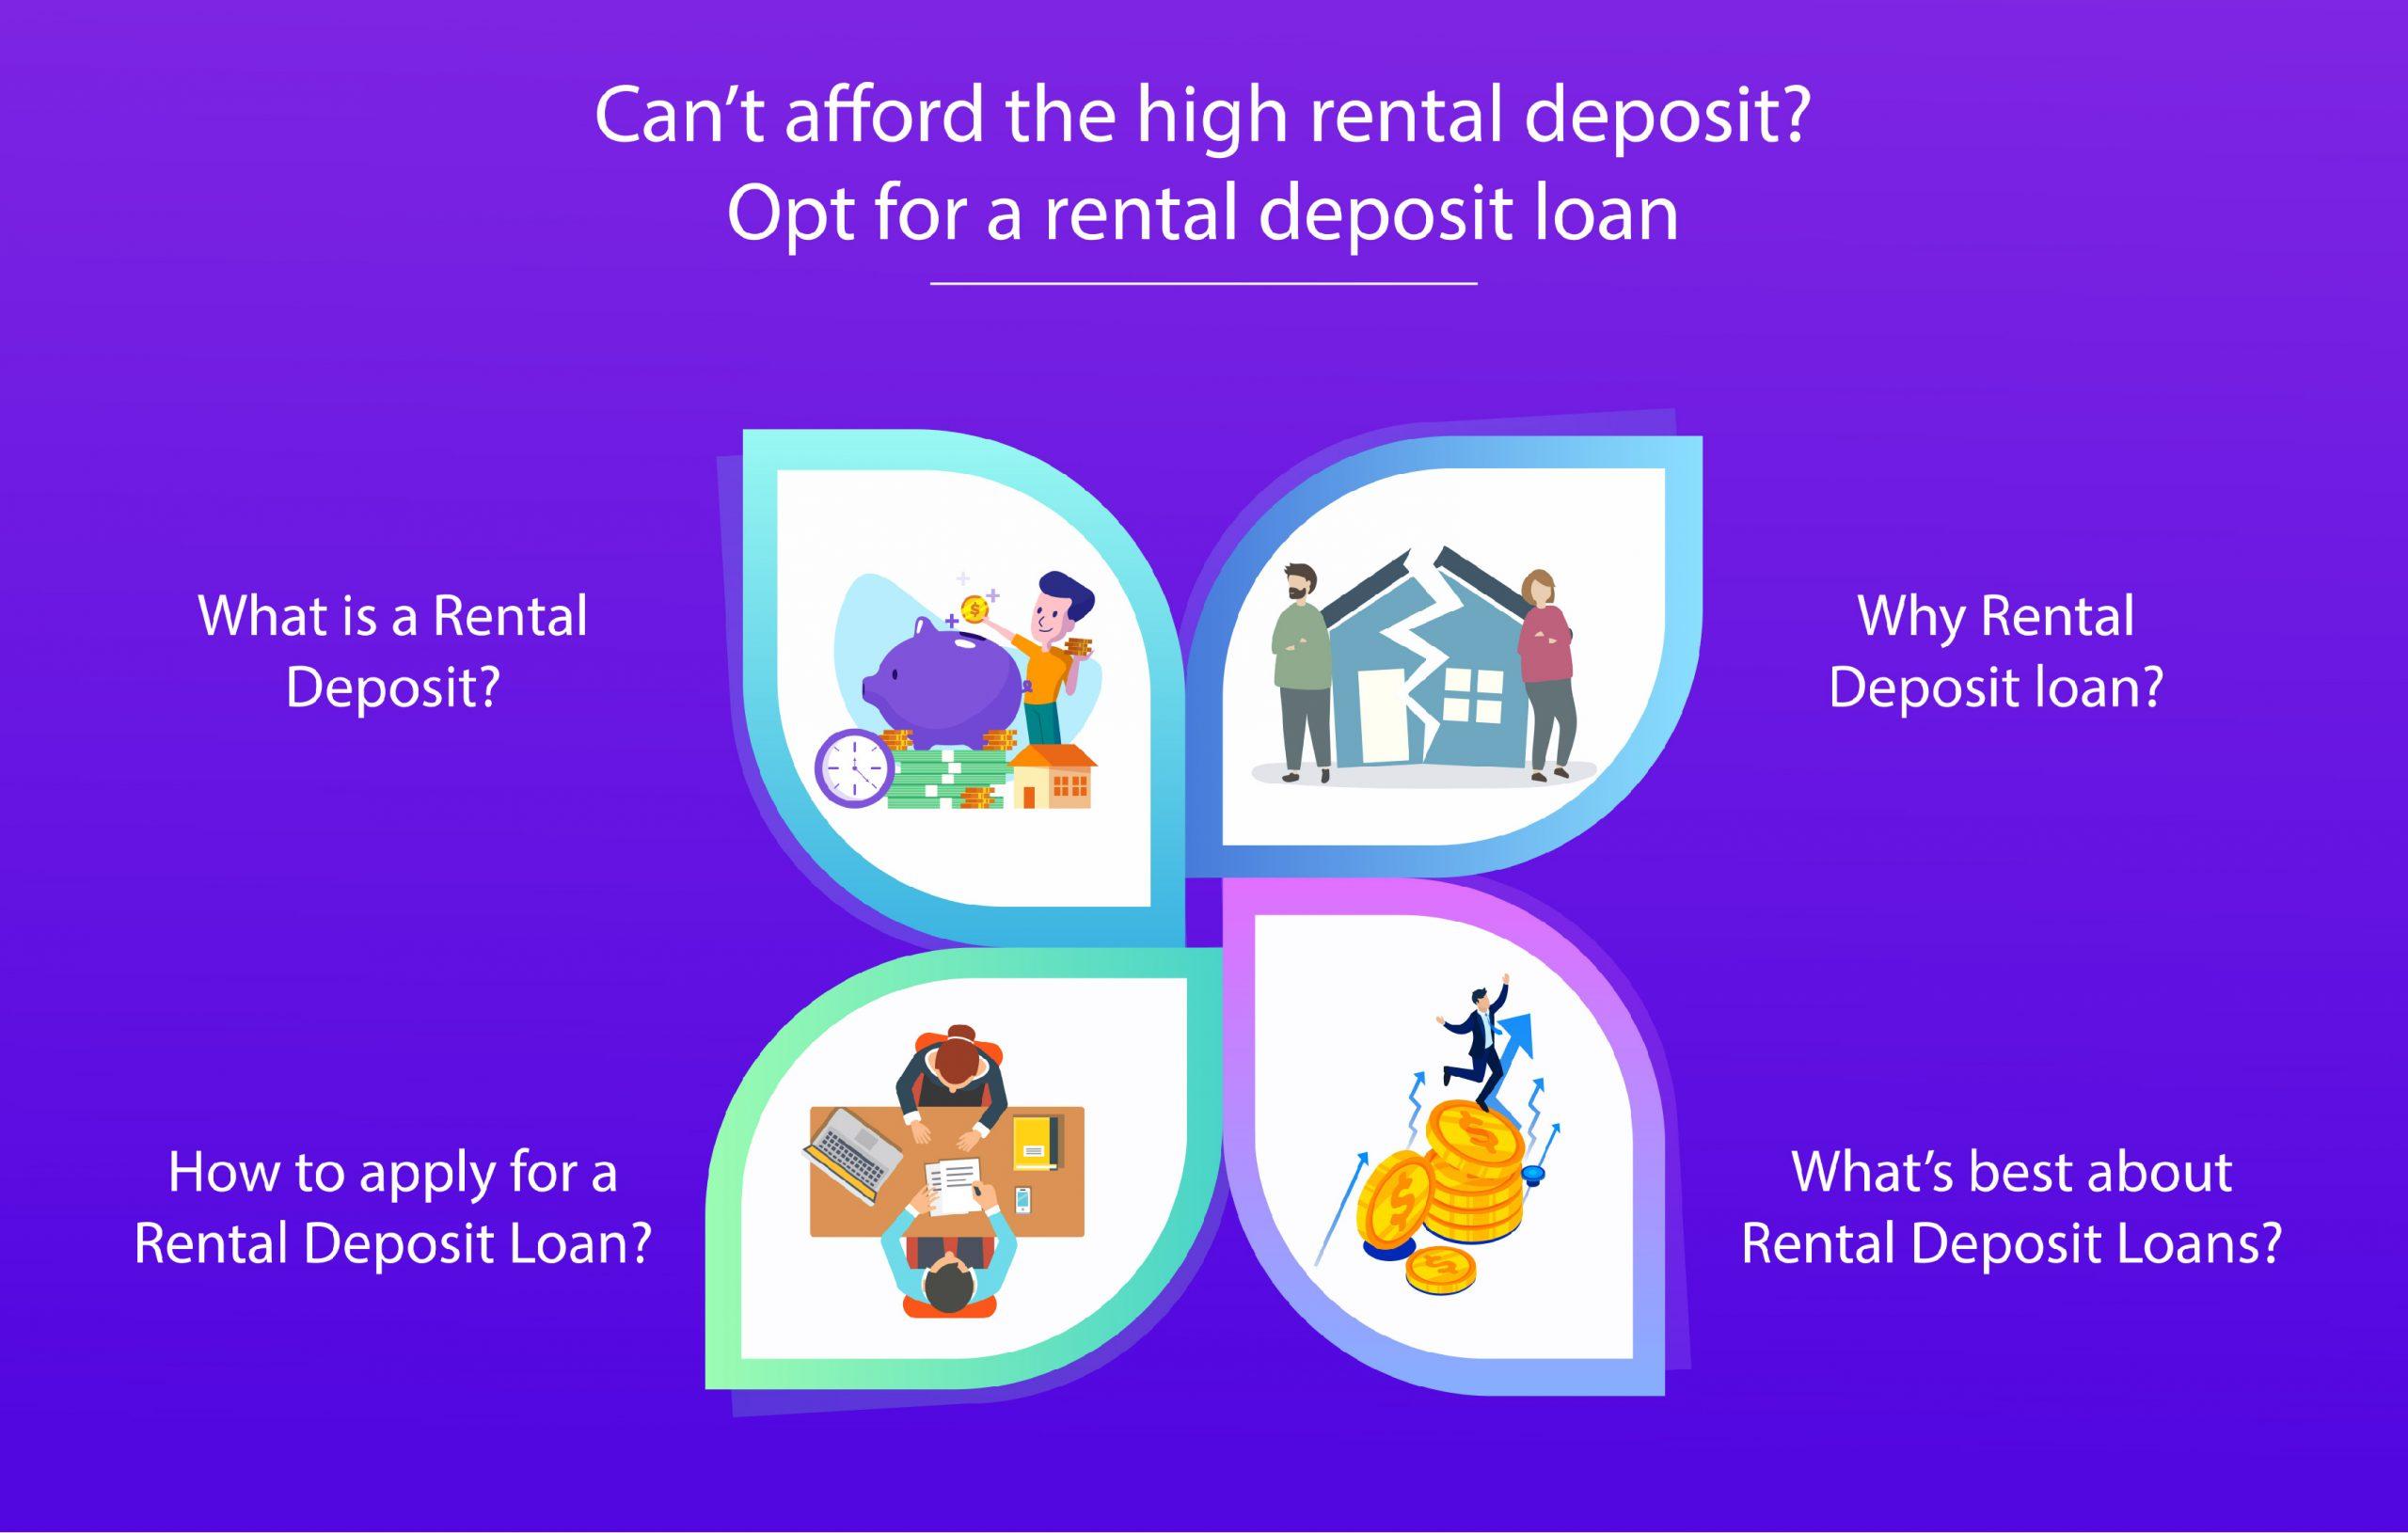 Can’t afford the high rental deposit? Opt for a rental deposit loan.